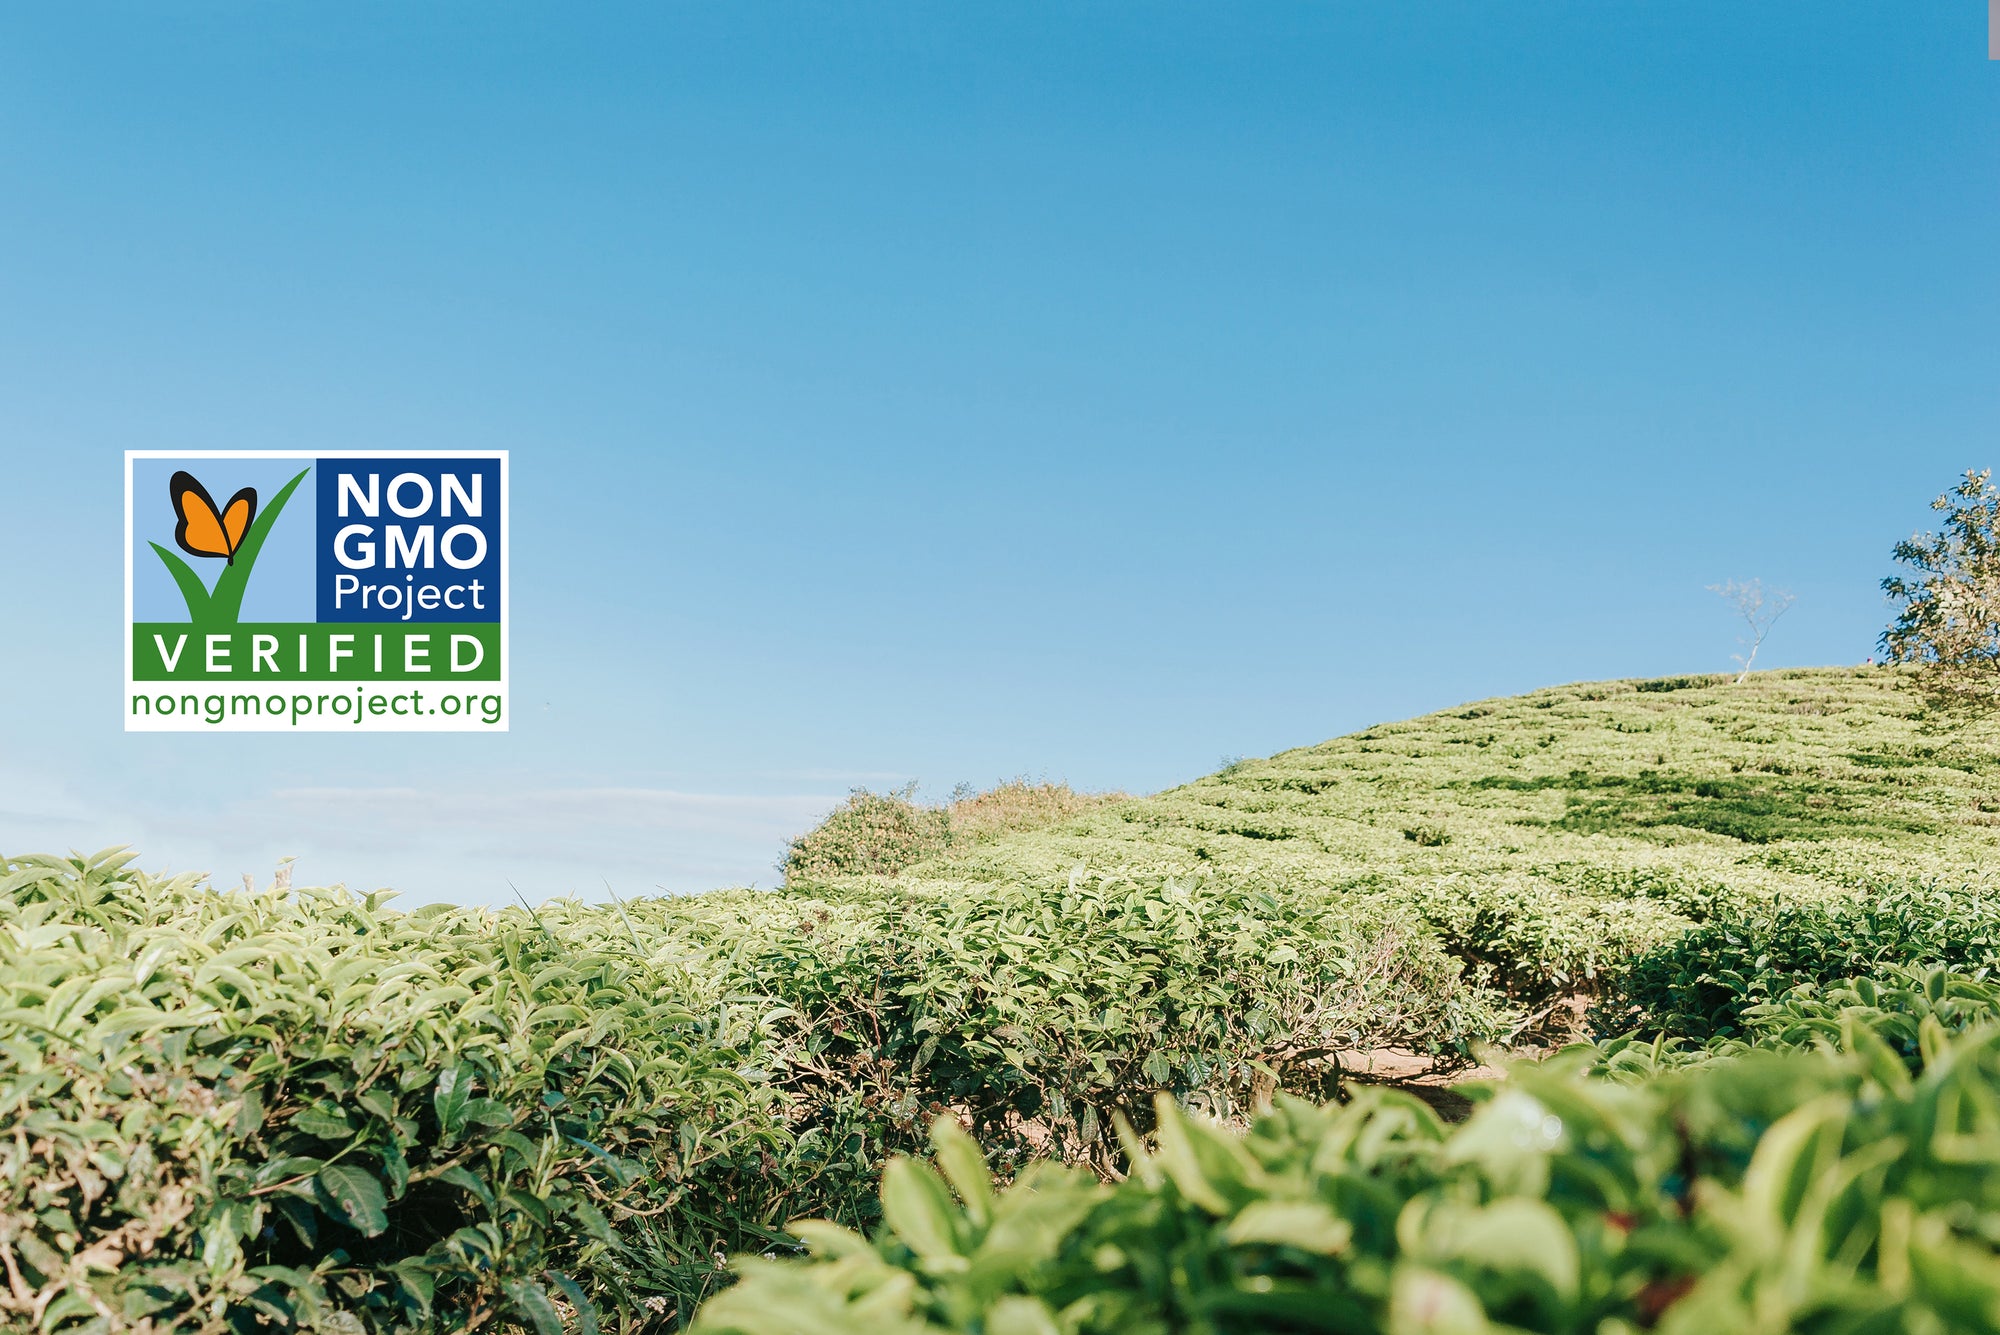 Bethesda, MD based Paromi Tea proudly announces that its pyramid sachet collection is officially Non-GMO Project Verified.